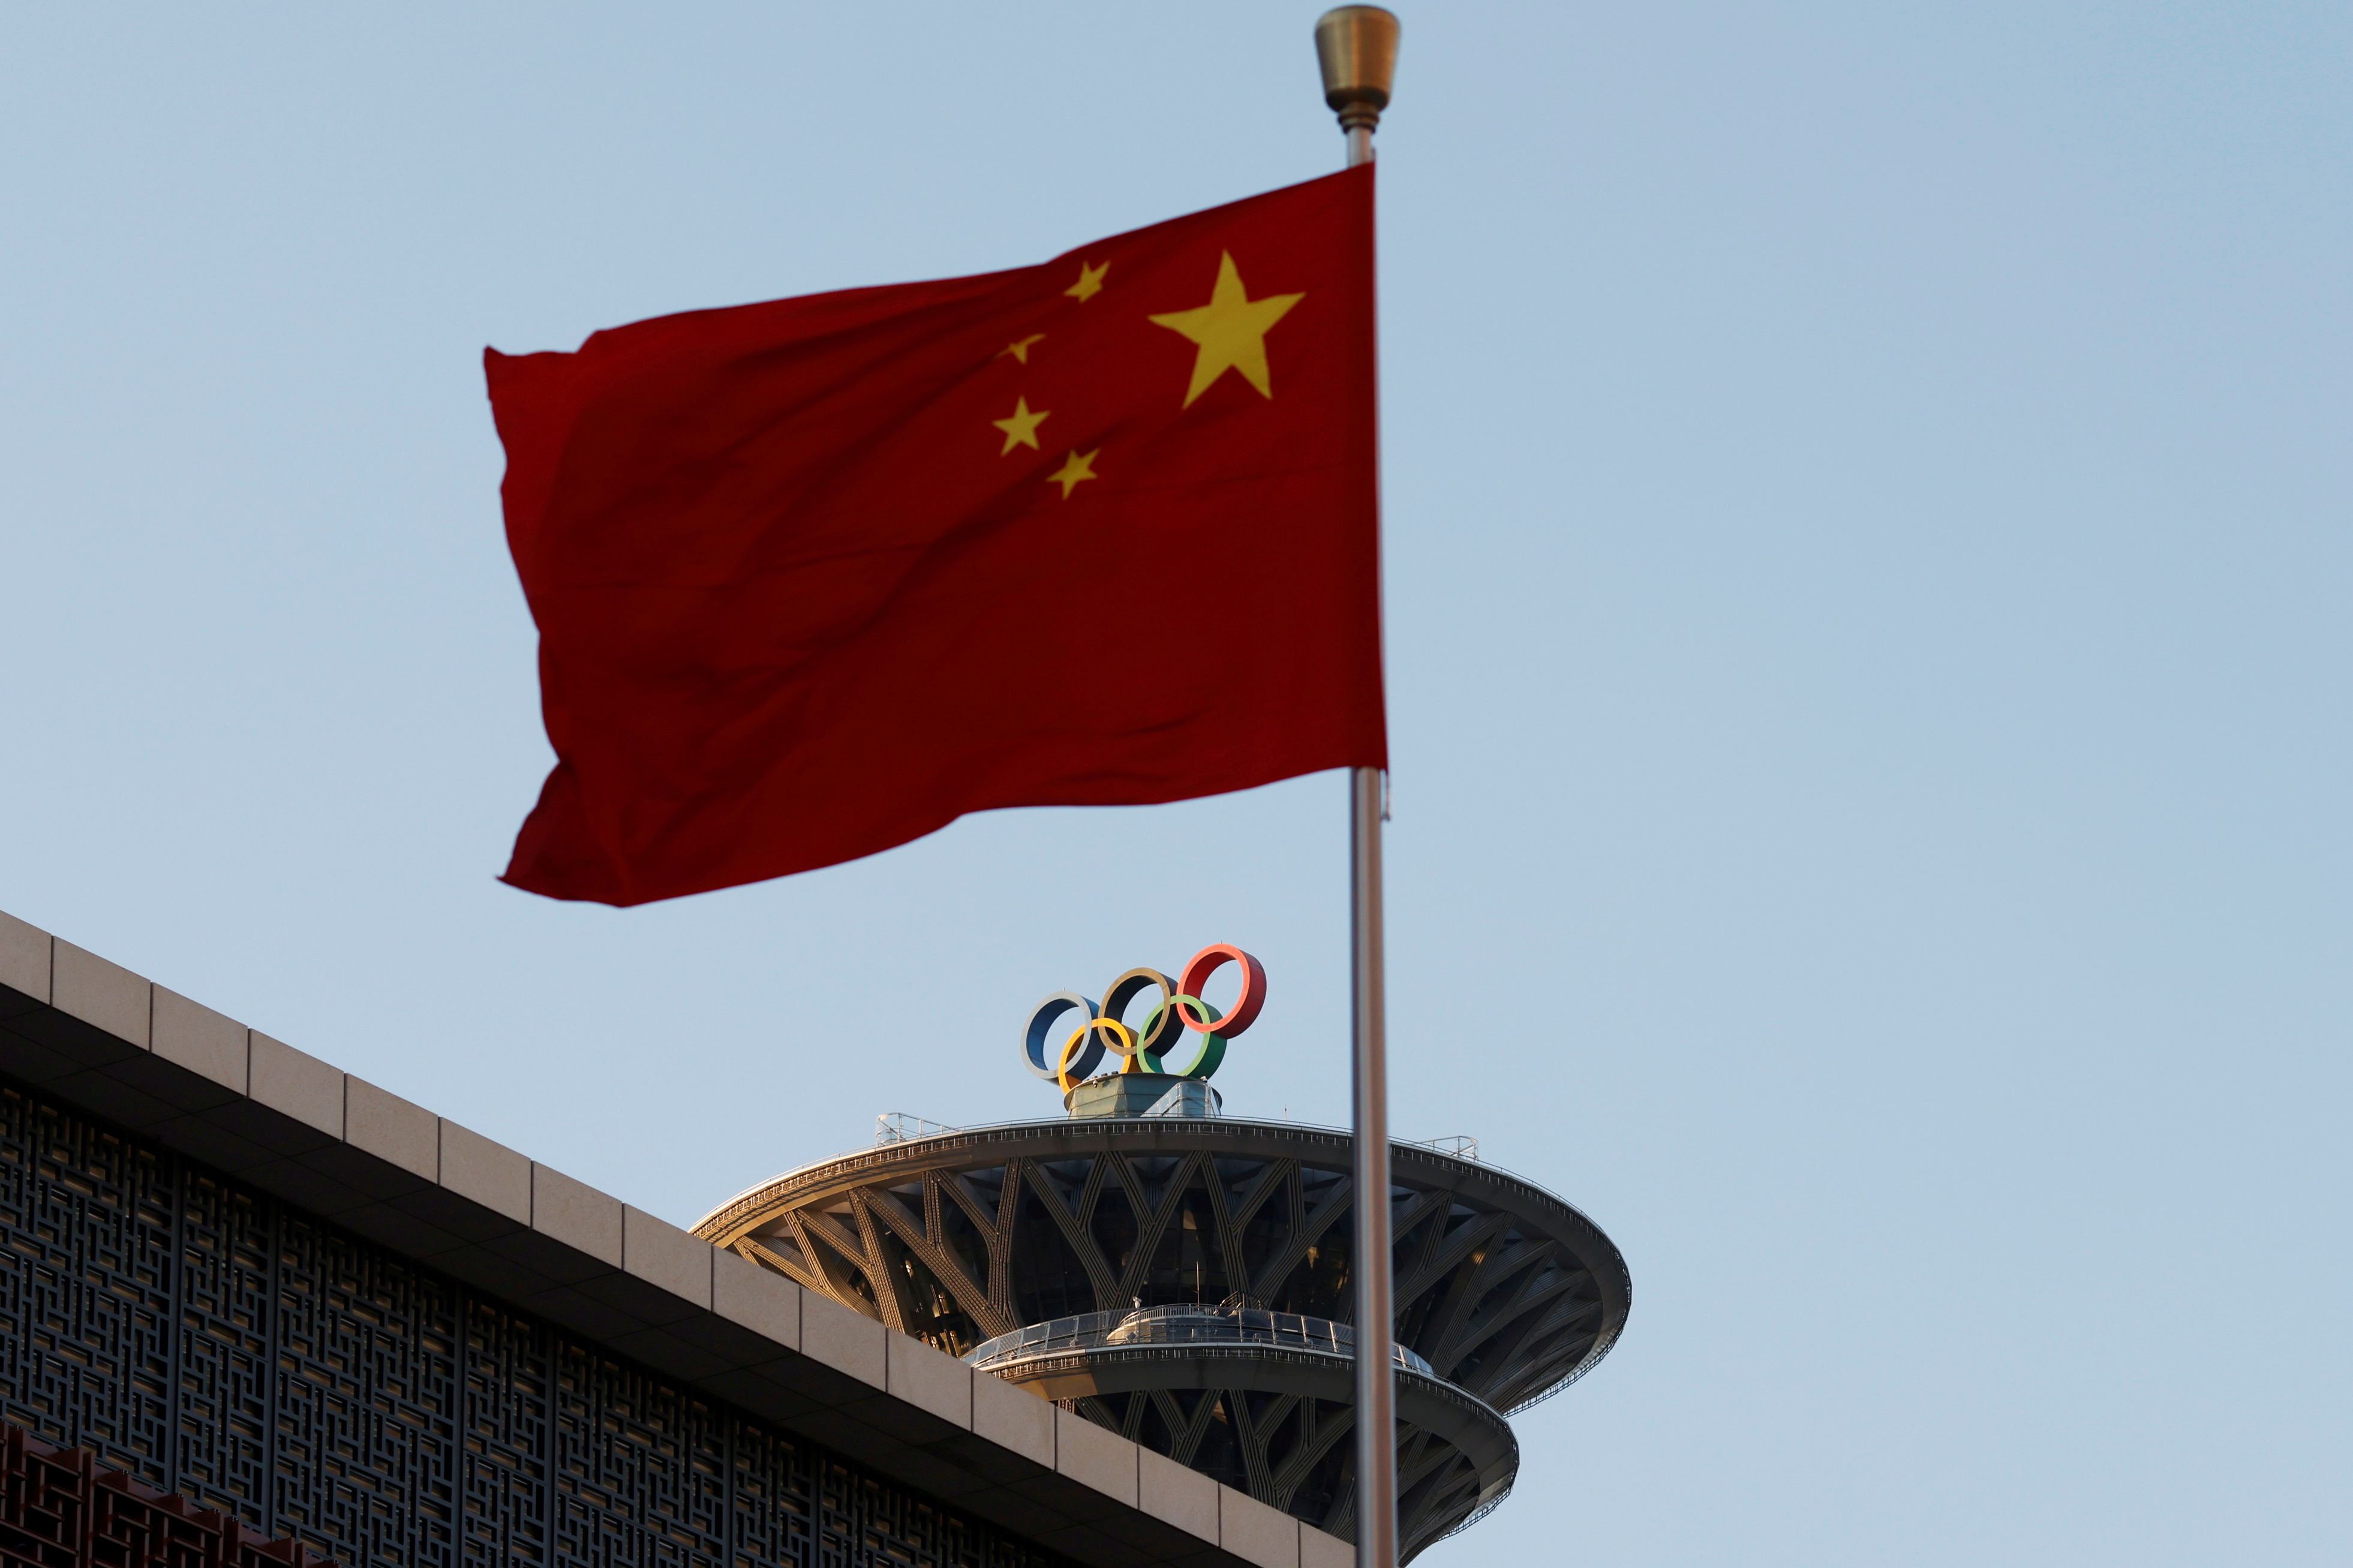 Chinese flag flutters near the Olympic rings on the Olympic Tower in Beijing